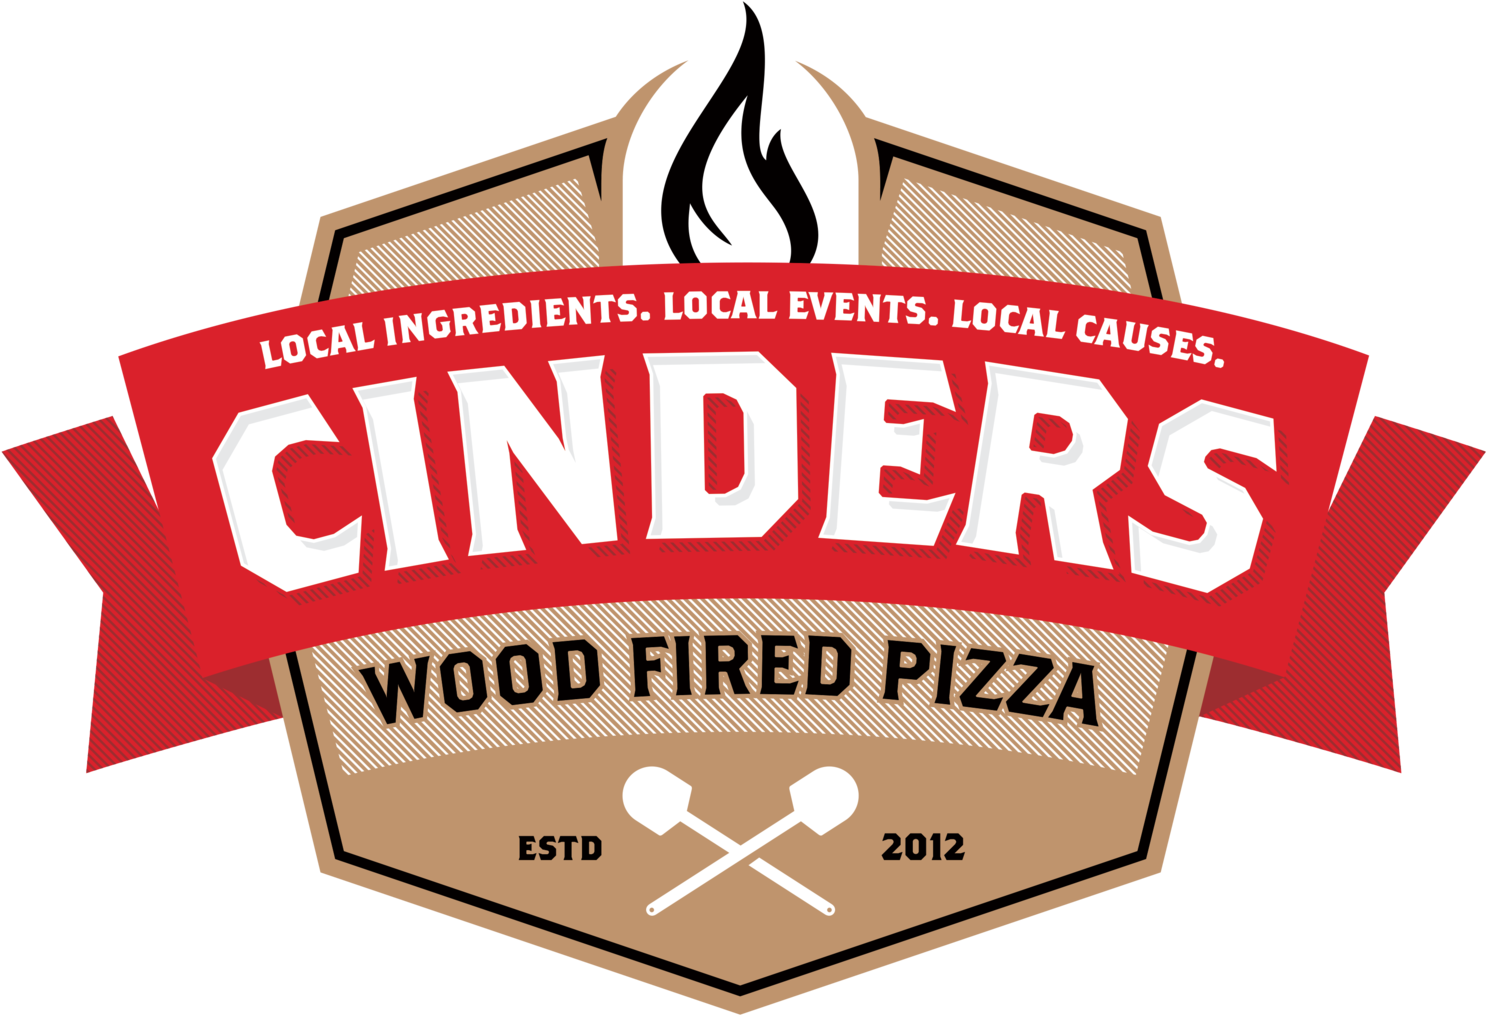 Cinders Wood Fired Pizza - Wood Fired Pizza Logo (1500x1026)